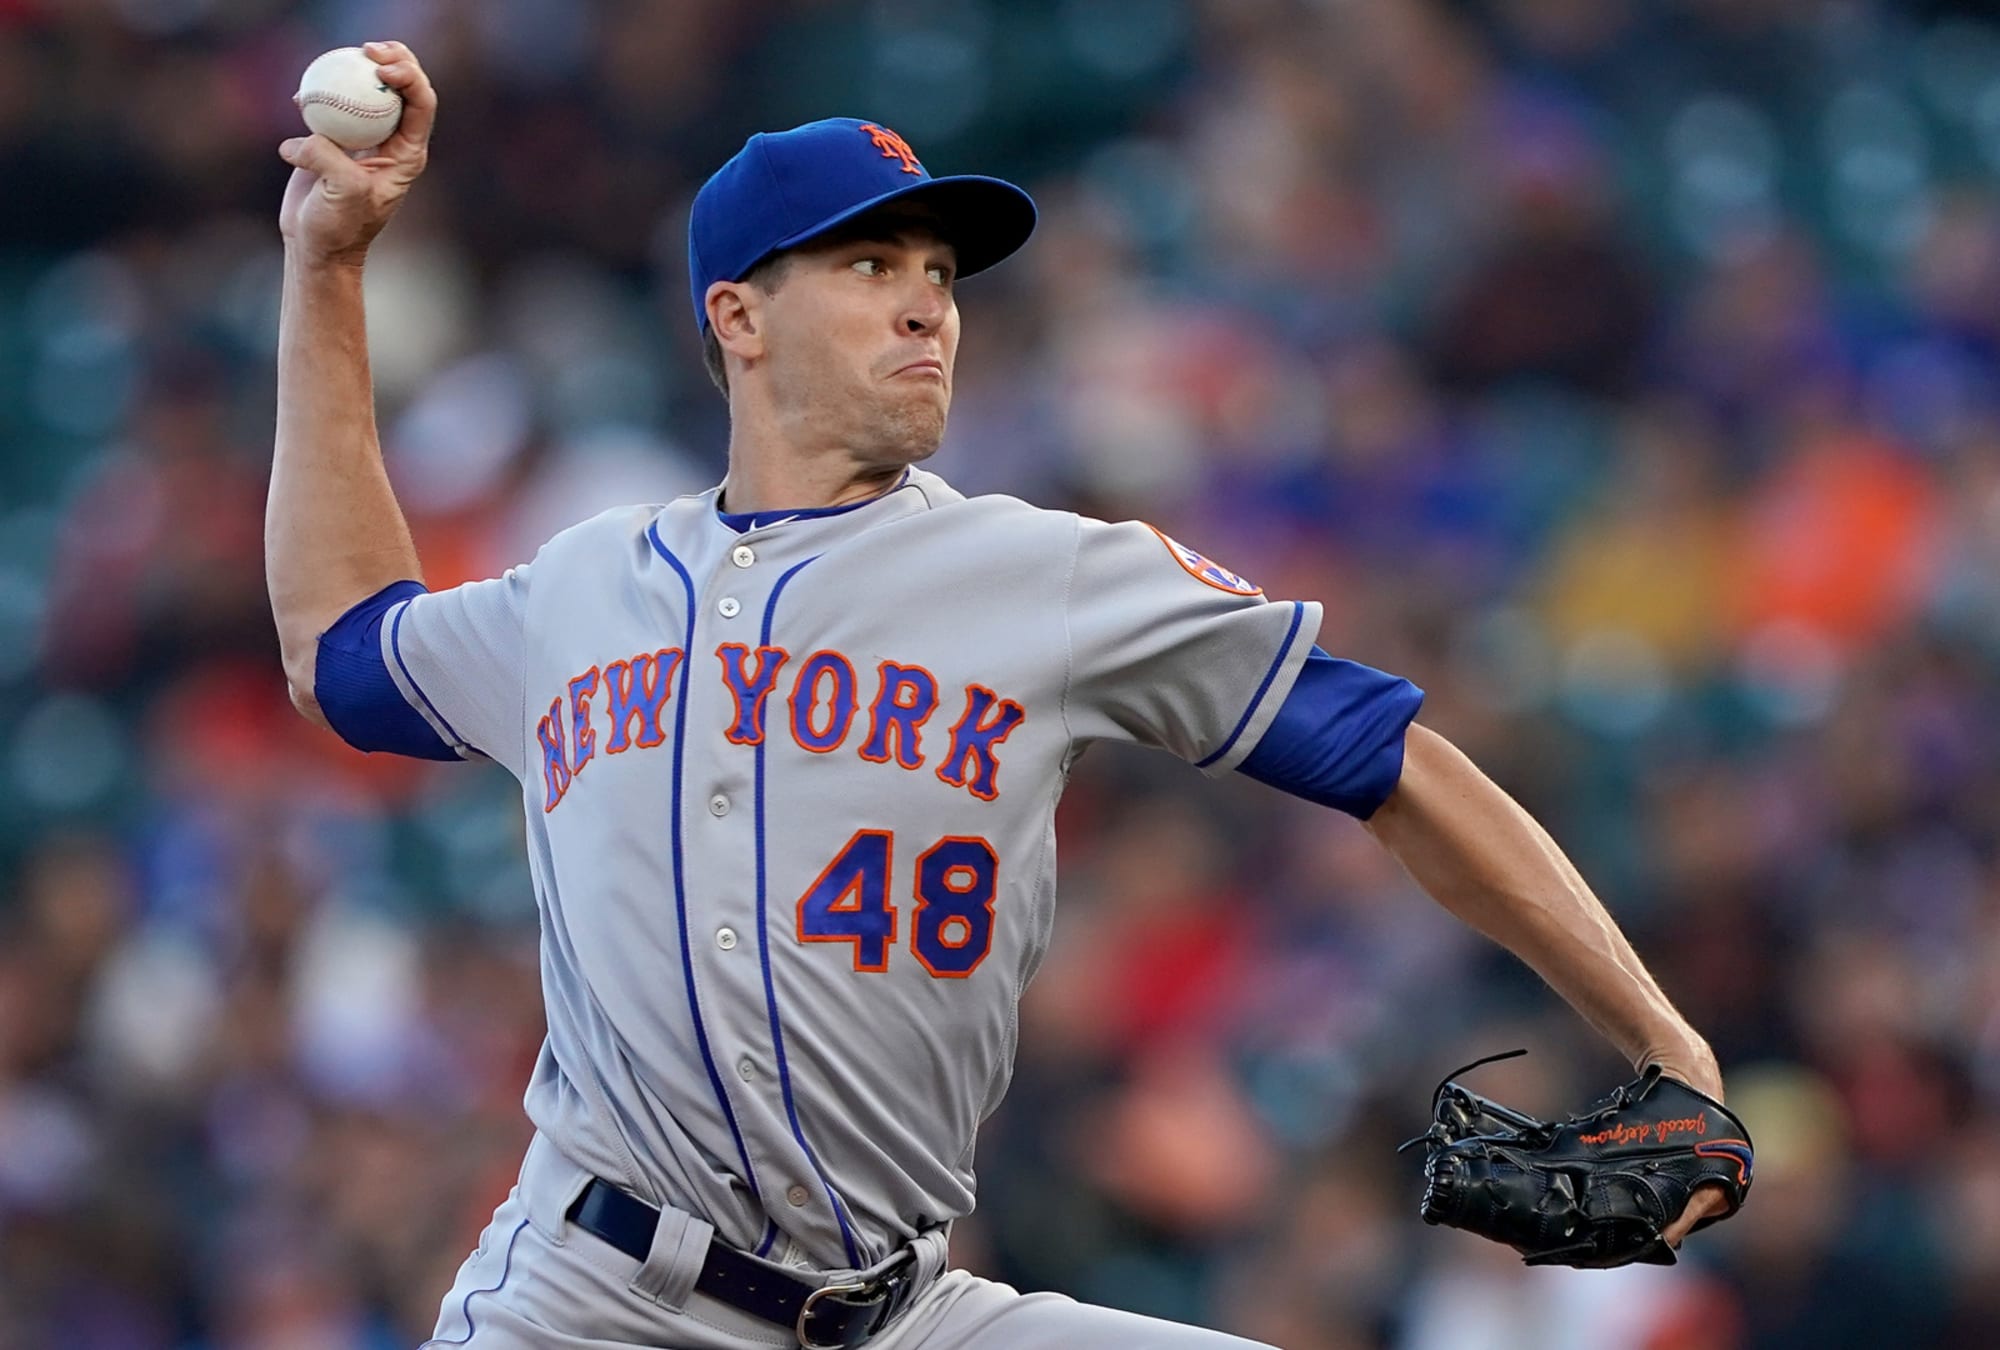 For Mets ace Jacob deGrom his legacy is about accomplishments more